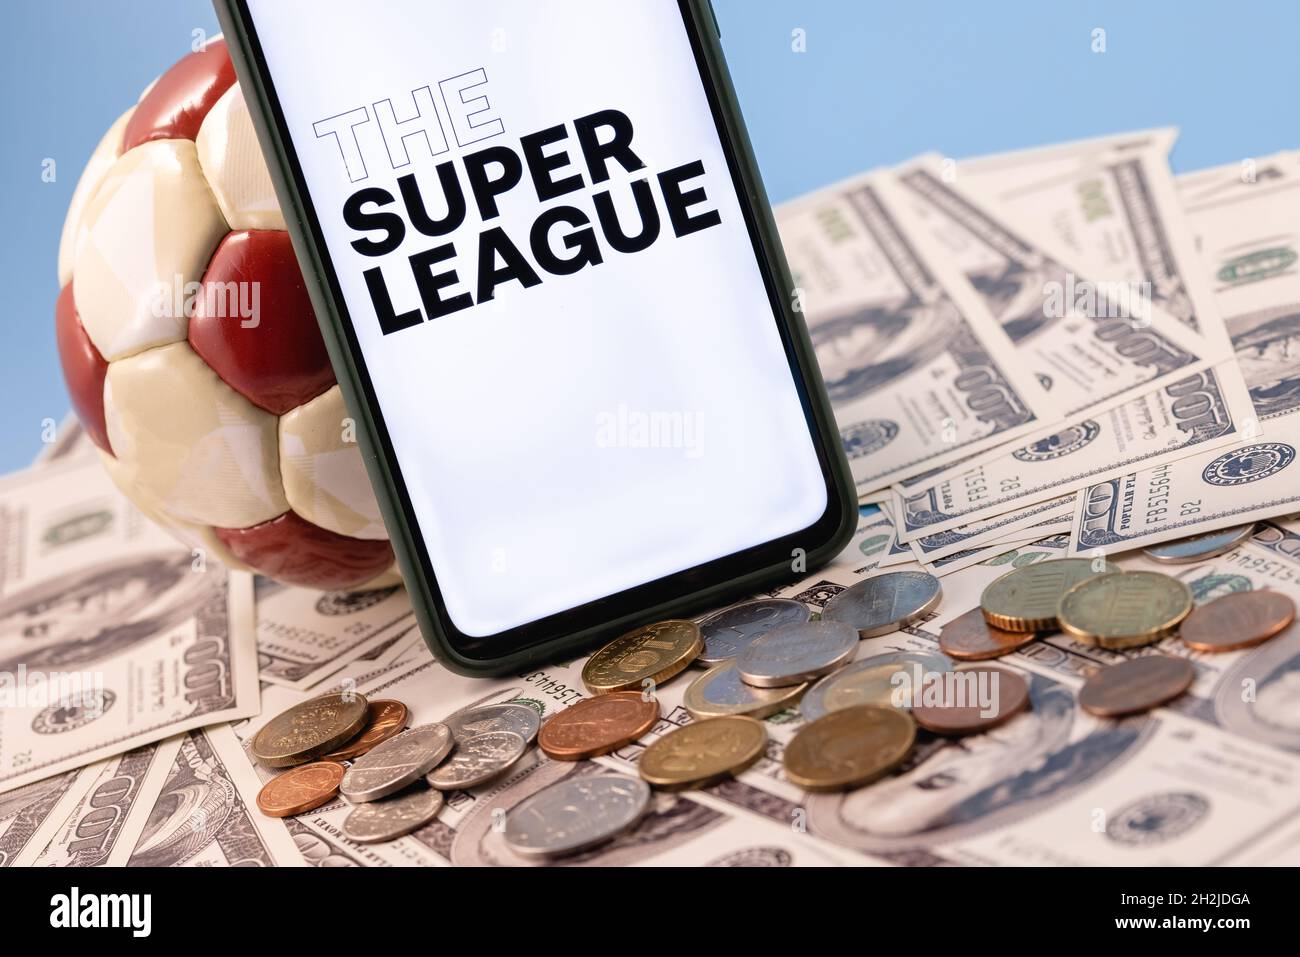 The Super League is an annual club football competition that involves twenty of the best and richest European football clubs. Stock Photo